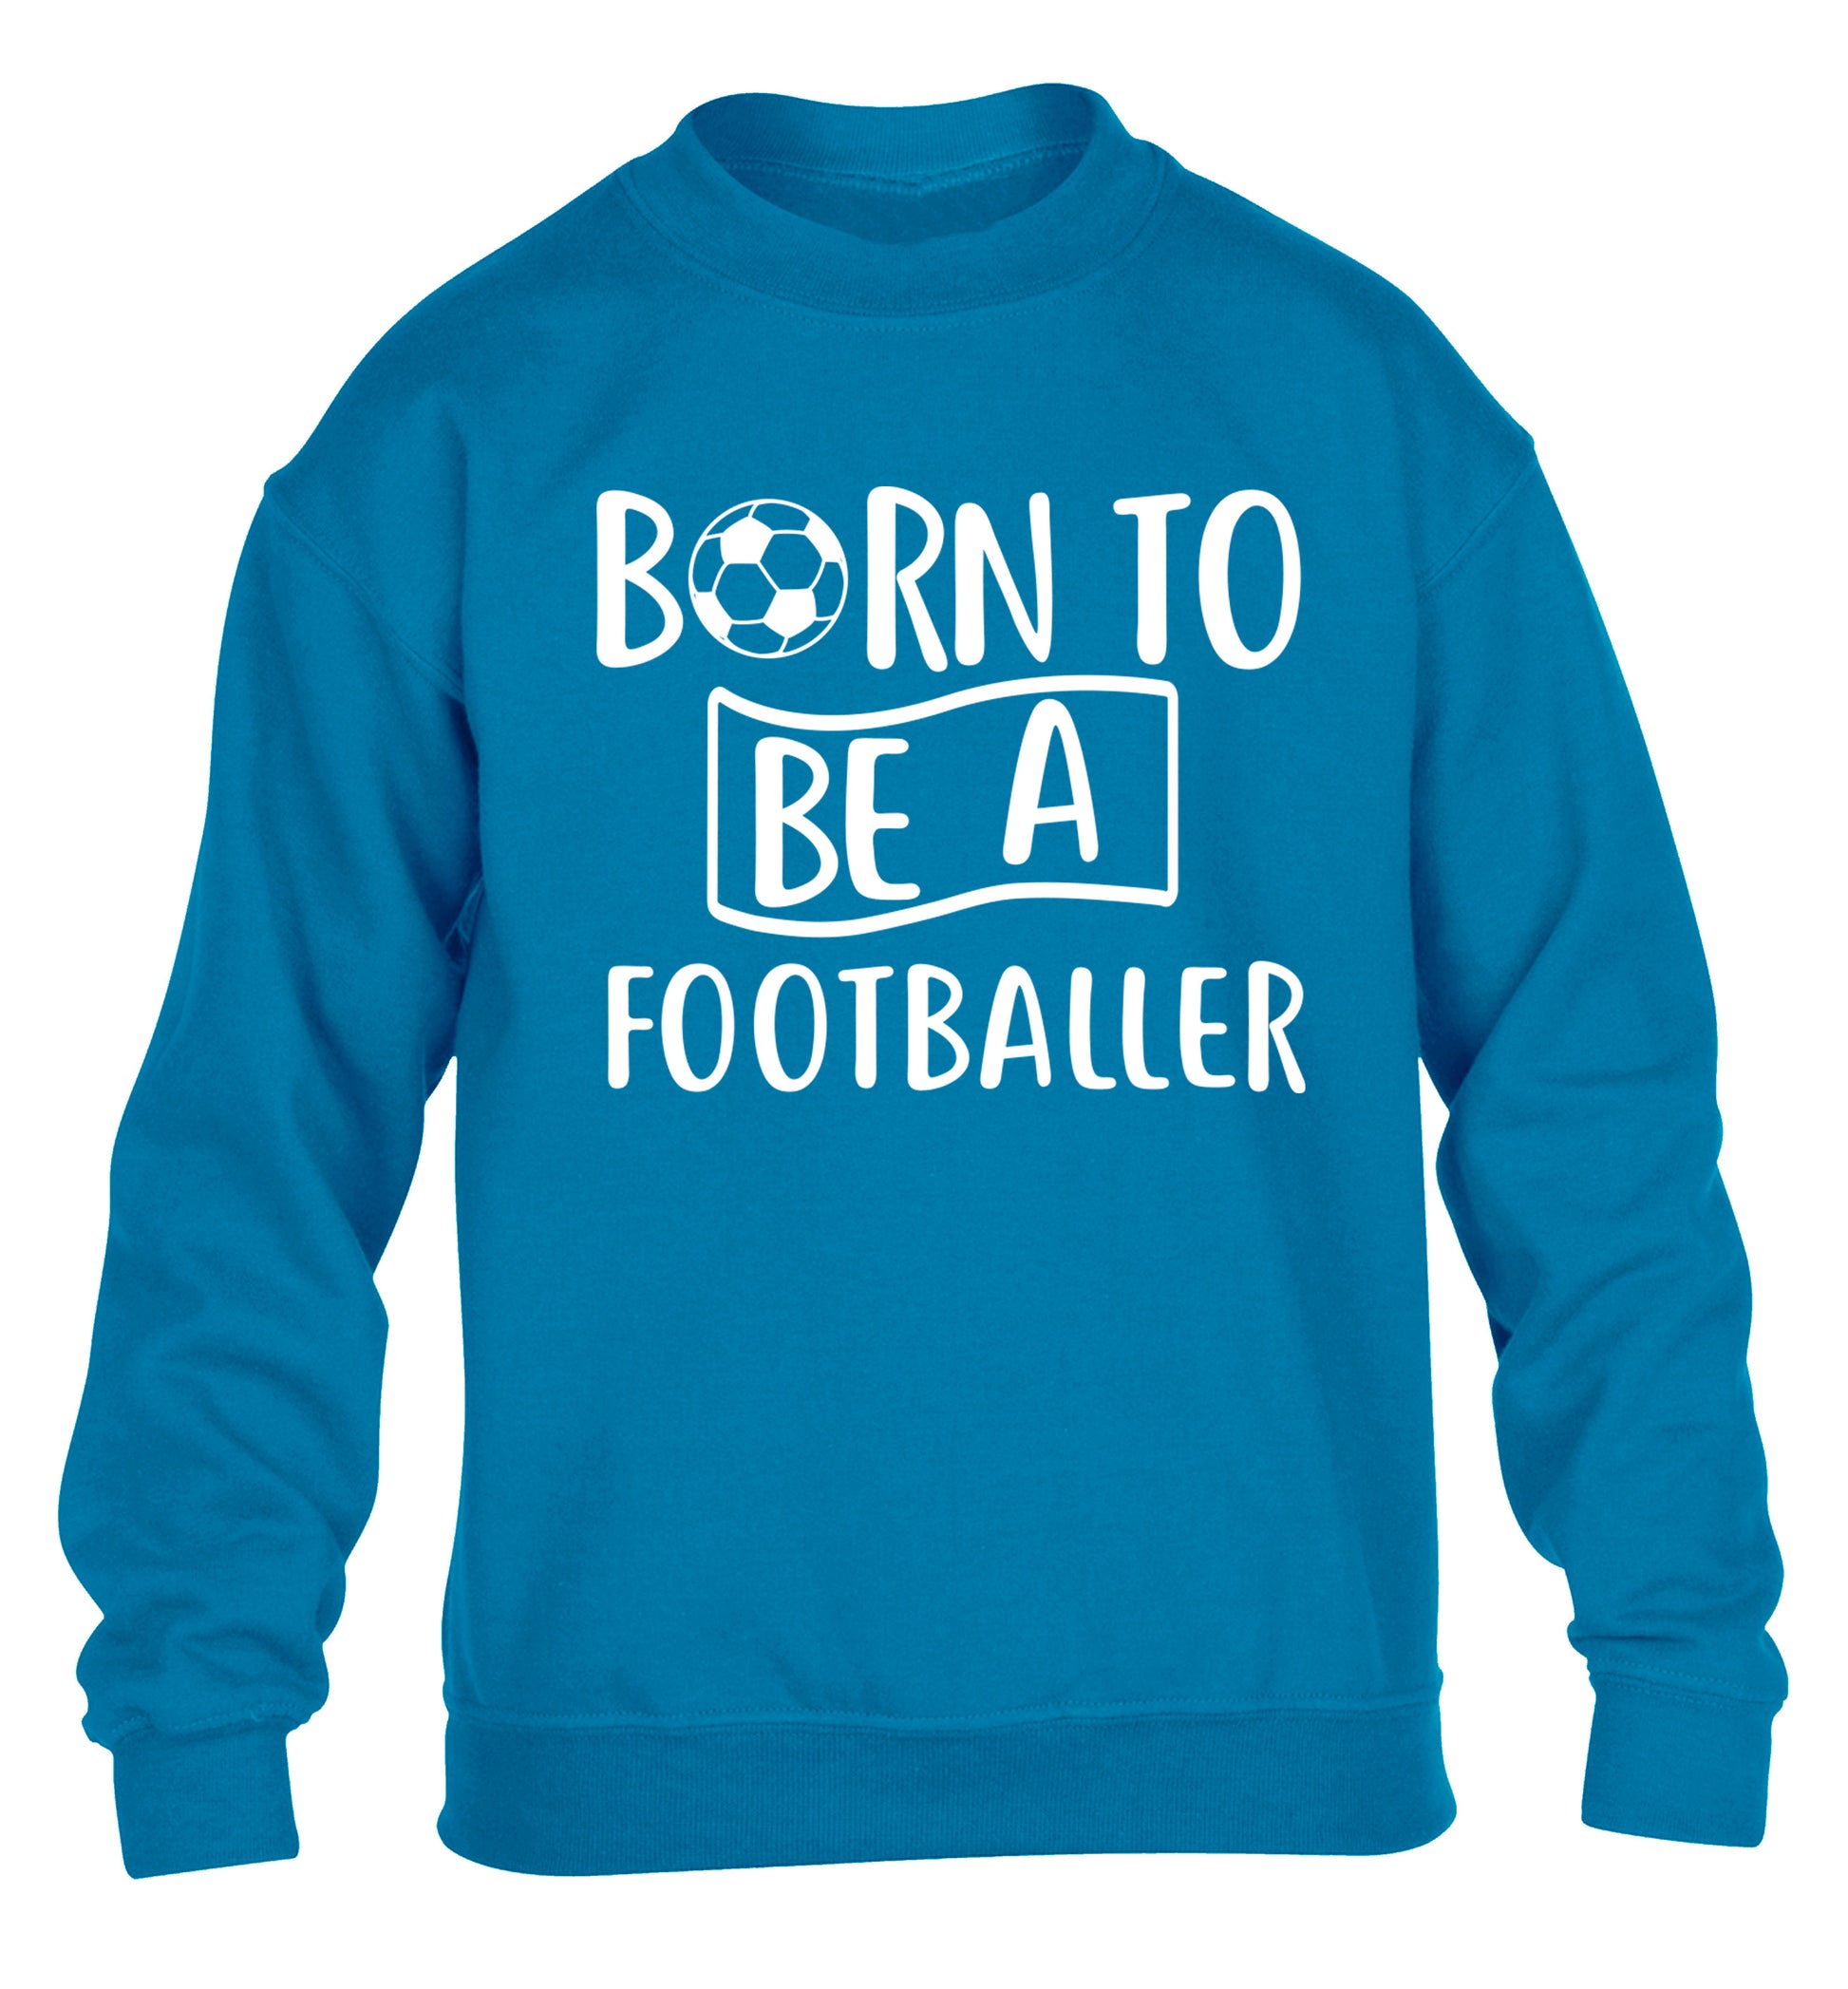 Born to be a footballer children's blue sweater 12-14 Years